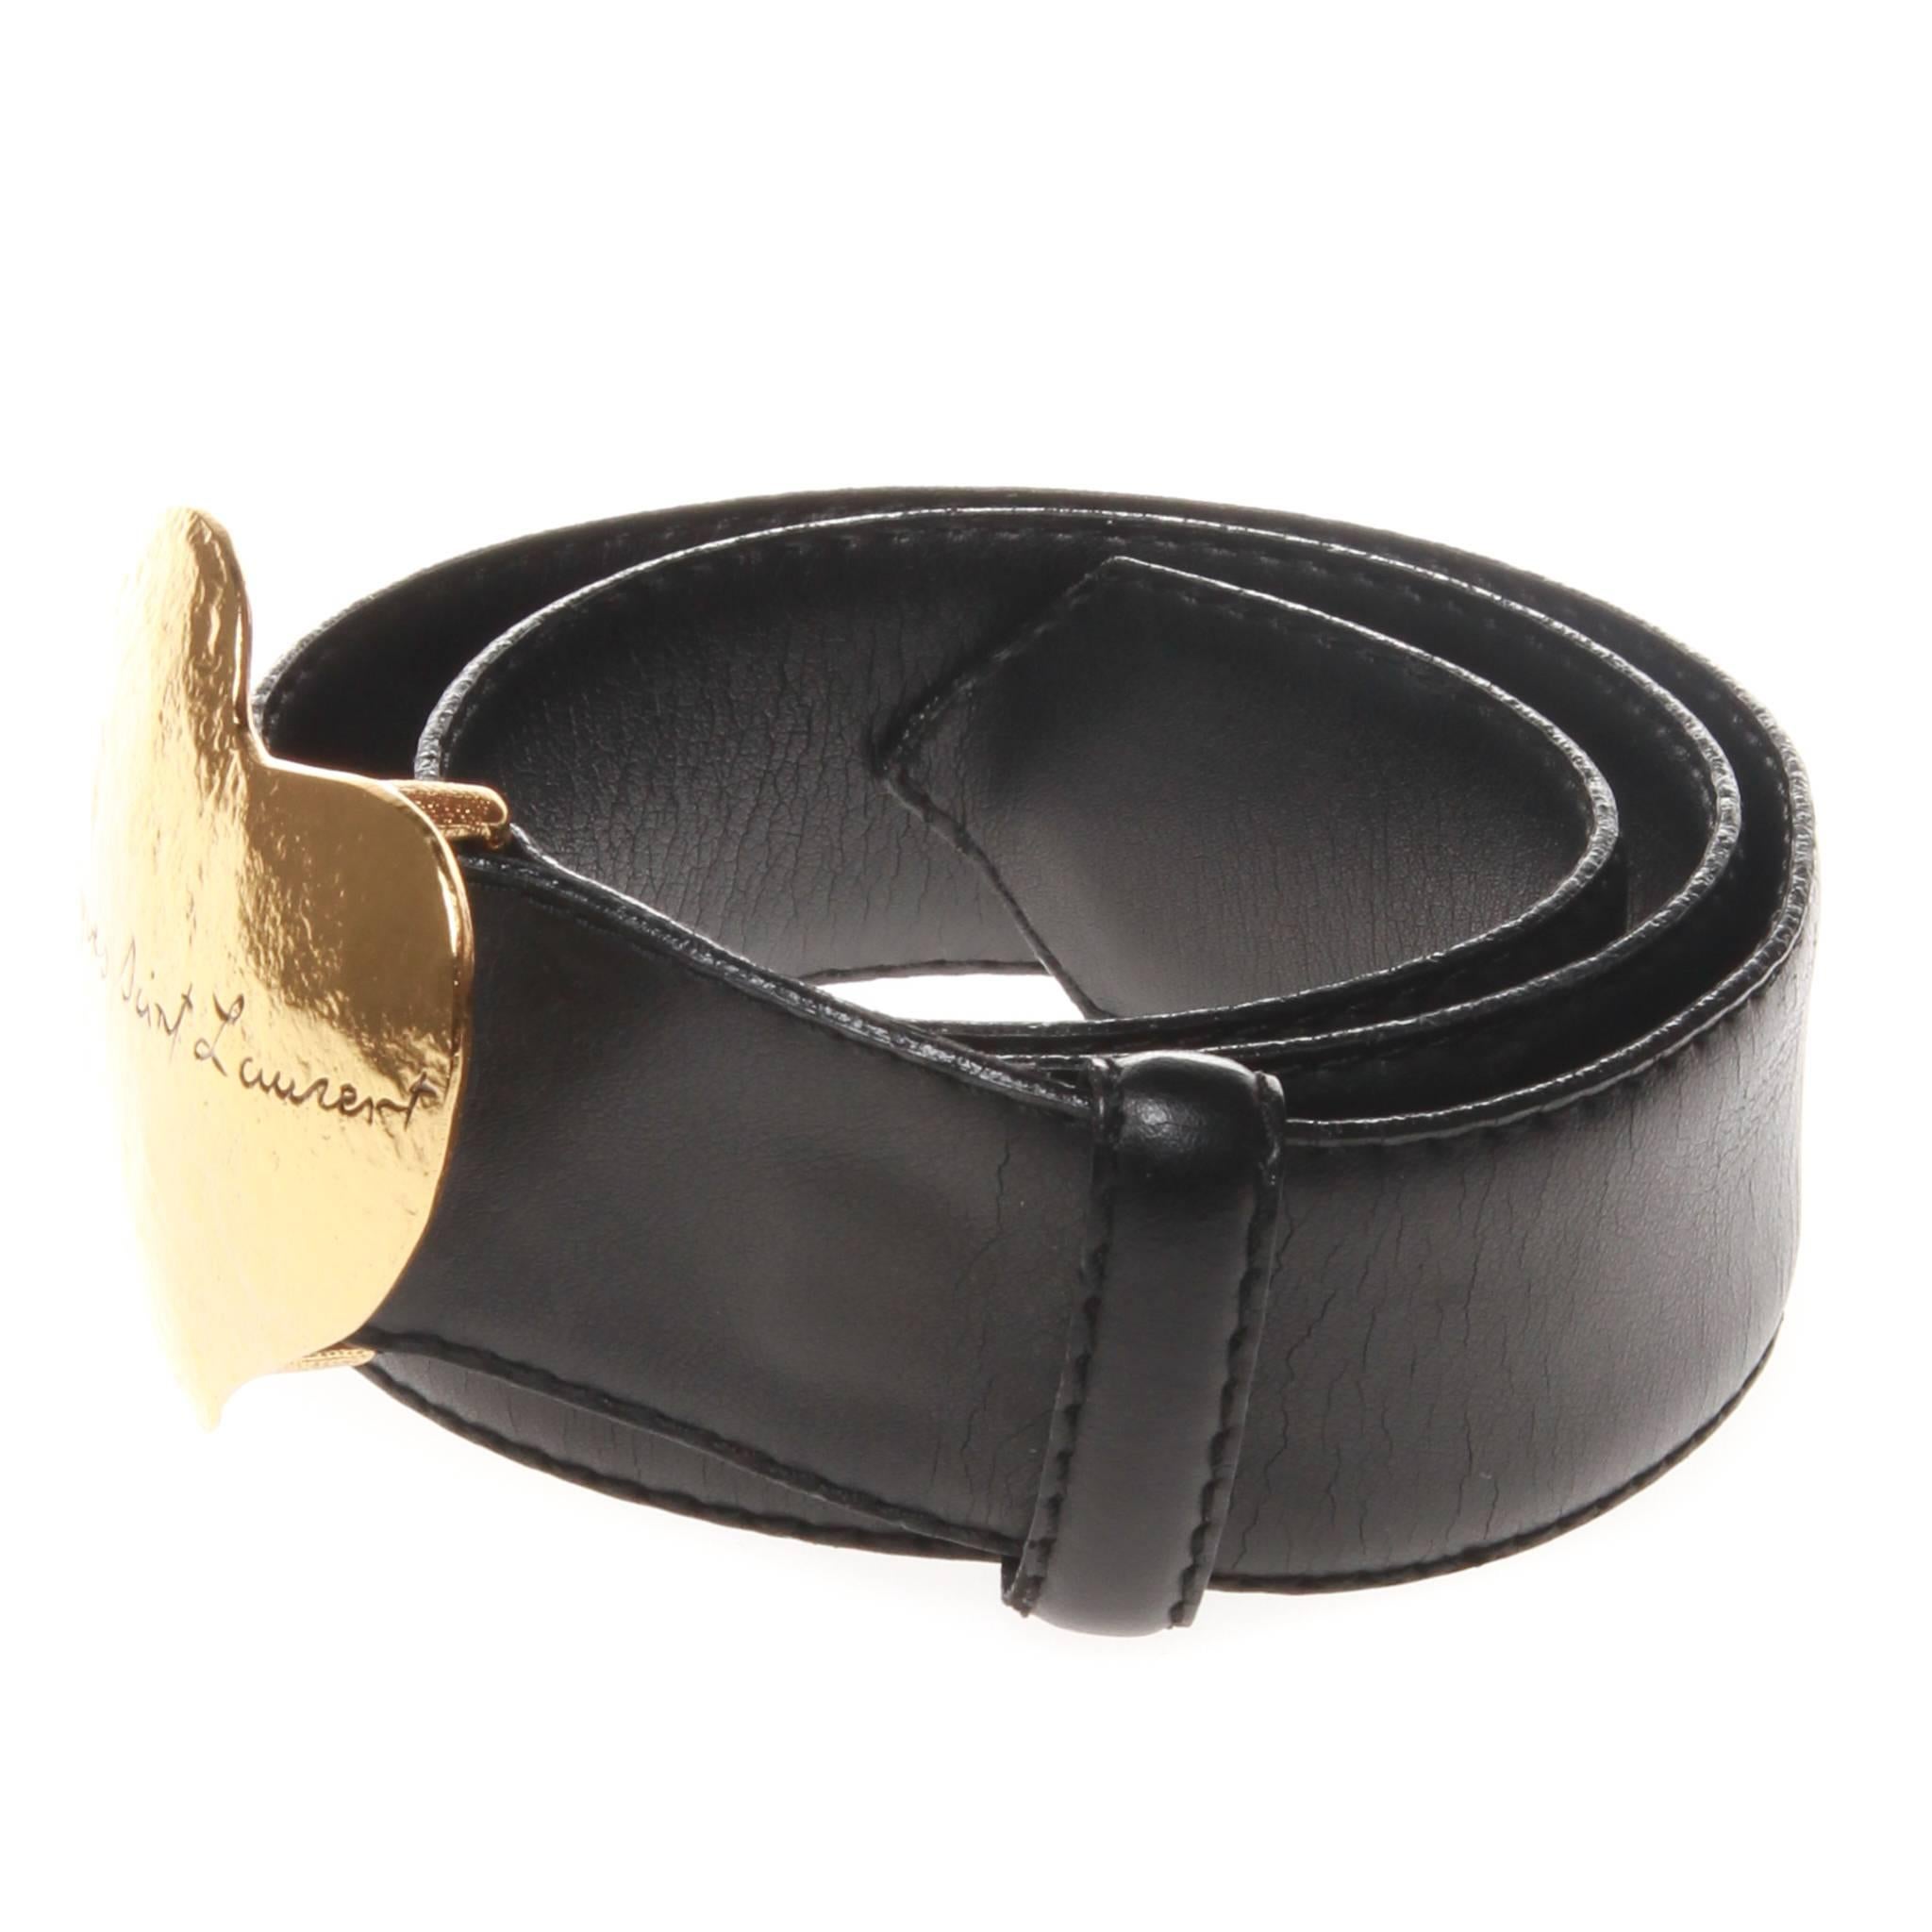 Vintage Yves Saint Laurent black leather belt featuring a gold tone heart buckle. Buckle is engraved with 'Yves Saint Laurent' in cursive script. It has the original 5 belt holes and is 71cm from buckle to furthest hole.  Made in France.